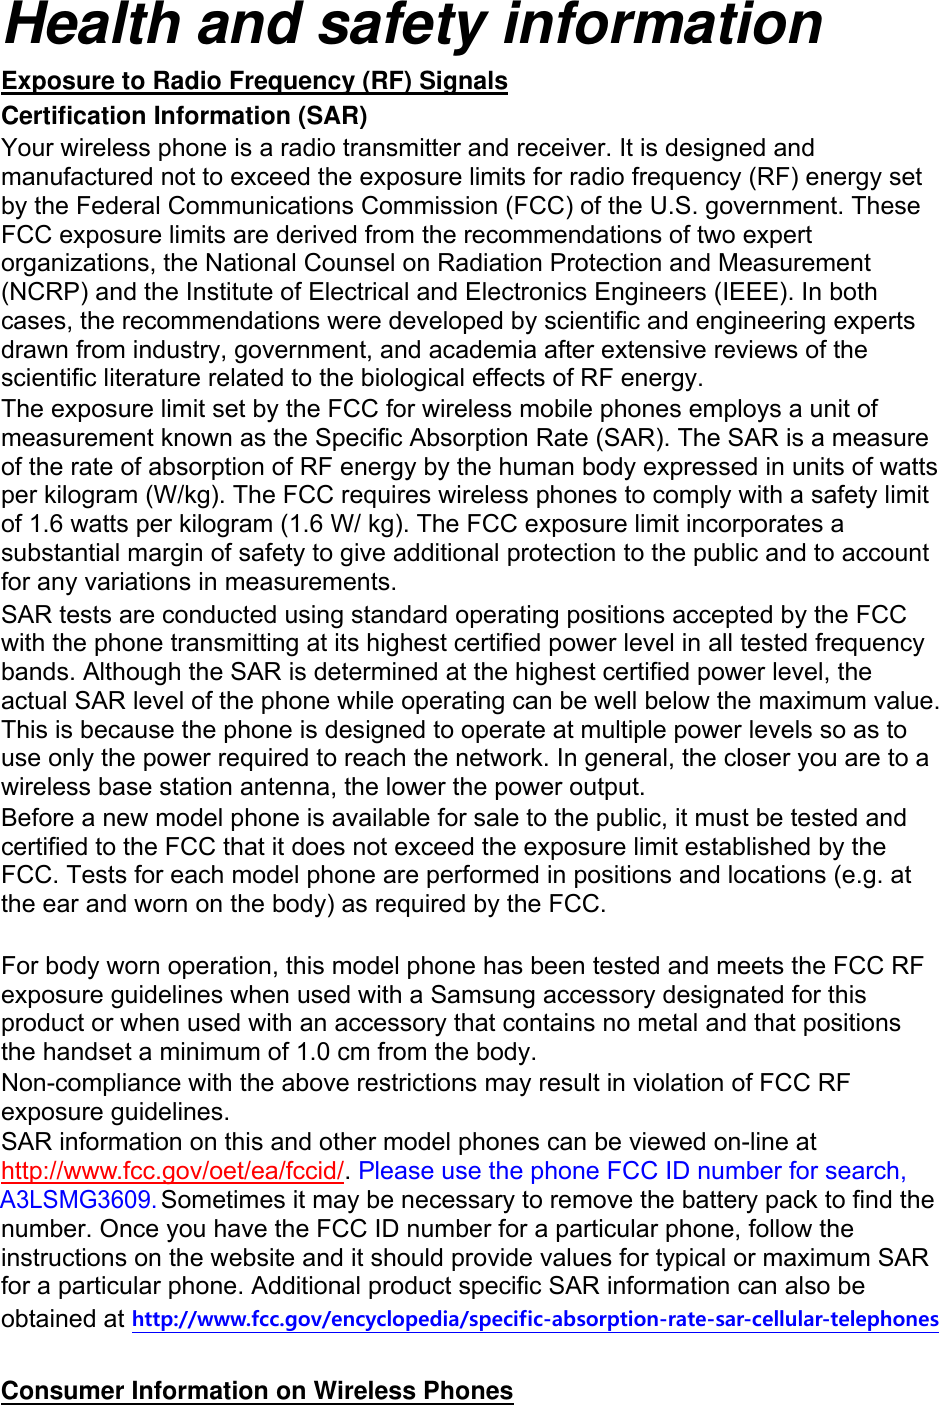 Health and safety information Exposure to Radio Frequency (RF) Signals Certification Information (SAR) Your wireless phone is a radio transmitter and receiver. It is designed and manufactured not to exceed the exposure limits for radio frequency (RF) energy set by the Federal Communications Commission (FCC) of the U.S. government. These FCC exposure limits are derived from the recommendations of two expert organizations, the National Counsel on Radiation Protection and Measurement (NCRP) and the Institute of Electrical and Electronics Engineers (IEEE). In both cases, the recommendations were developed by scientific and engineering experts drawn from industry, government, and academia after extensive reviews of the scientific literature related to the biological effects of RF energy. The exposure limit set by the FCC for wireless mobile phones employs a unit of measurement known as the Specific Absorption Rate (SAR). The SAR is a measure of the rate of absorption of RF energy by the human body expressed in units of watts per kilogram (W/kg). The FCC requires wireless phones to comply with a safety limit of 1.6 watts per kilogram (1.6 W/ kg). The FCC exposure limit incorporates a substantial margin of safety to give additional protection to the public and to account for any variations in measurements. SAR tests are conducted using standard operating positions accepted by the FCC with the phone transmitting at its highest certified power level in all tested frequency bands. Although the SAR is determined at the highest certified power level, the actual SAR level of the phone while operating can be well below the maximum value. This is because the phone is designed to operate at multiple power levels so as to use only the power required to reach the network. In general, the closer you are to a wireless base station antenna, the lower the power output. Before a new model phone is available for sale to the public, it must be tested and certified to the FCC that it does not exceed the exposure limit established by the FCC. Tests for each model phone are performed in positions and locations (e.g. at the ear and worn on the body) as required by the FCC.      For body worn operation, this model phone has been tested and meets the FCC RF exposure guidelines when used with a Samsung accessory designated for this product or when used with an accessory that contains no metal and that positions the handset a minimum of 1.0 cm from the body.   Non-compliance with the above restrictions may result in violation of FCC RF exposure guidelines. SAR information on this and other model phones can be viewed on-line at http://www.fcc.gov/oet/ea/fccid/. Please use the phone FCC ID number for search, A3LSMG3609. Sometimes it may be necessary to remove the battery pack to find the number. Once you have the FCC ID number for a particular phone, follow the instructions on the website and it should provide values for typical or maximum SAR for a particular phone. Additional product specific SAR information can also be obtained at http://www.fcc.gov/encyclopedia/specific-absorption-rate-sar-cellular-telephones  Consumer Information on Wireless Phones 